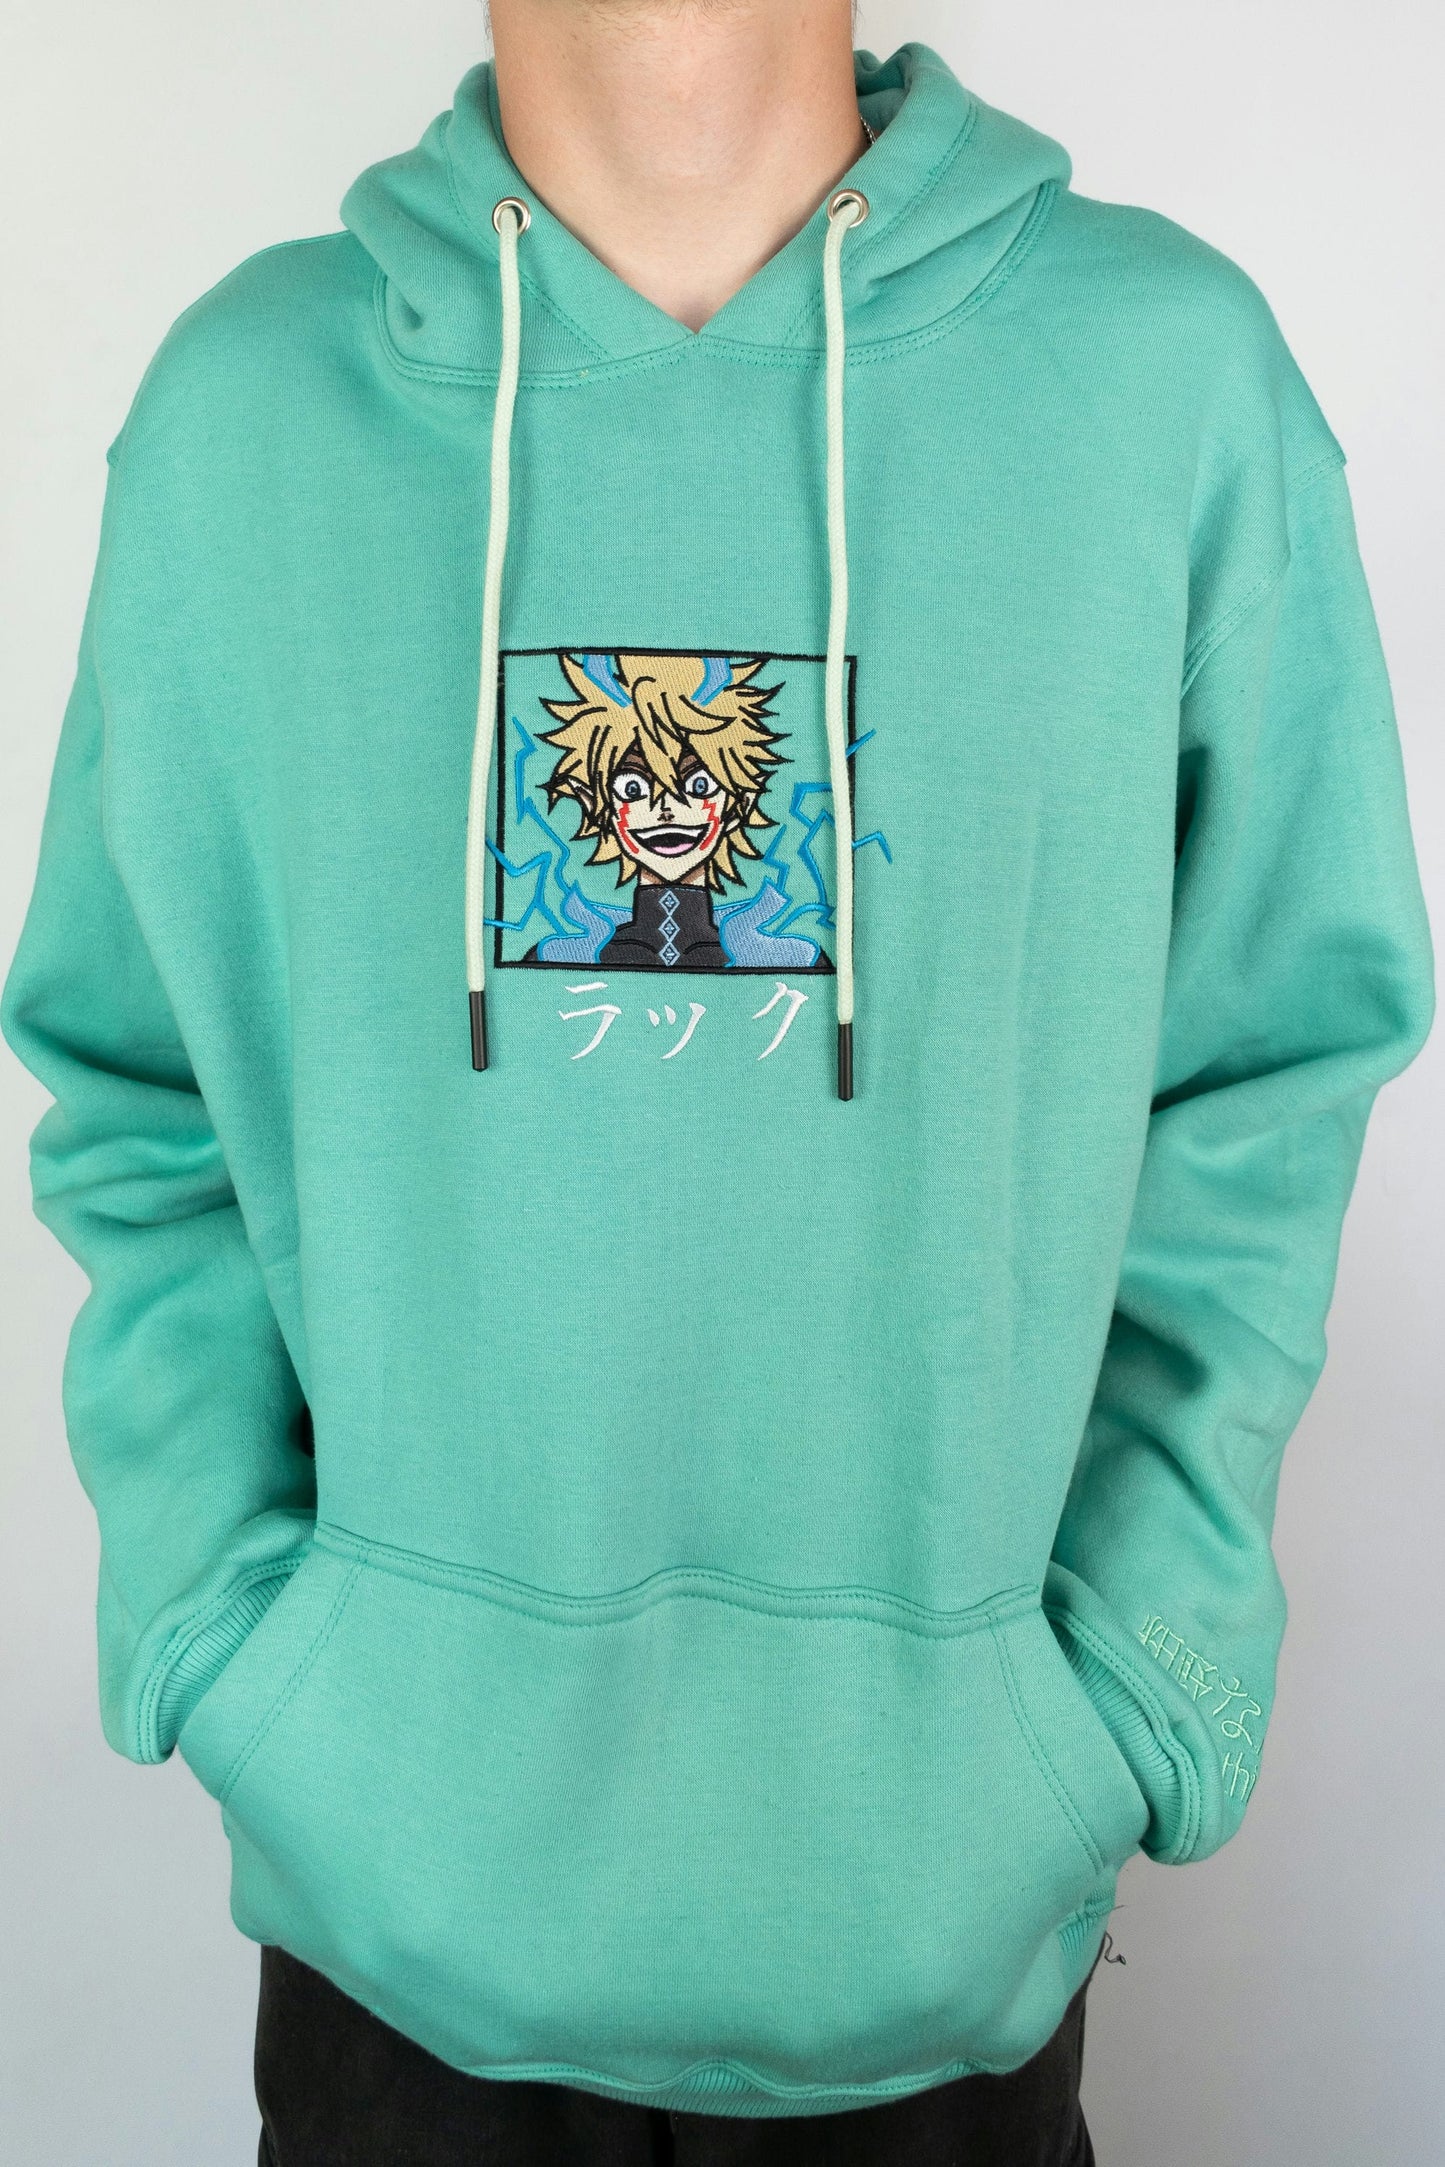 Luck Embroidered Mint Green Hoodie